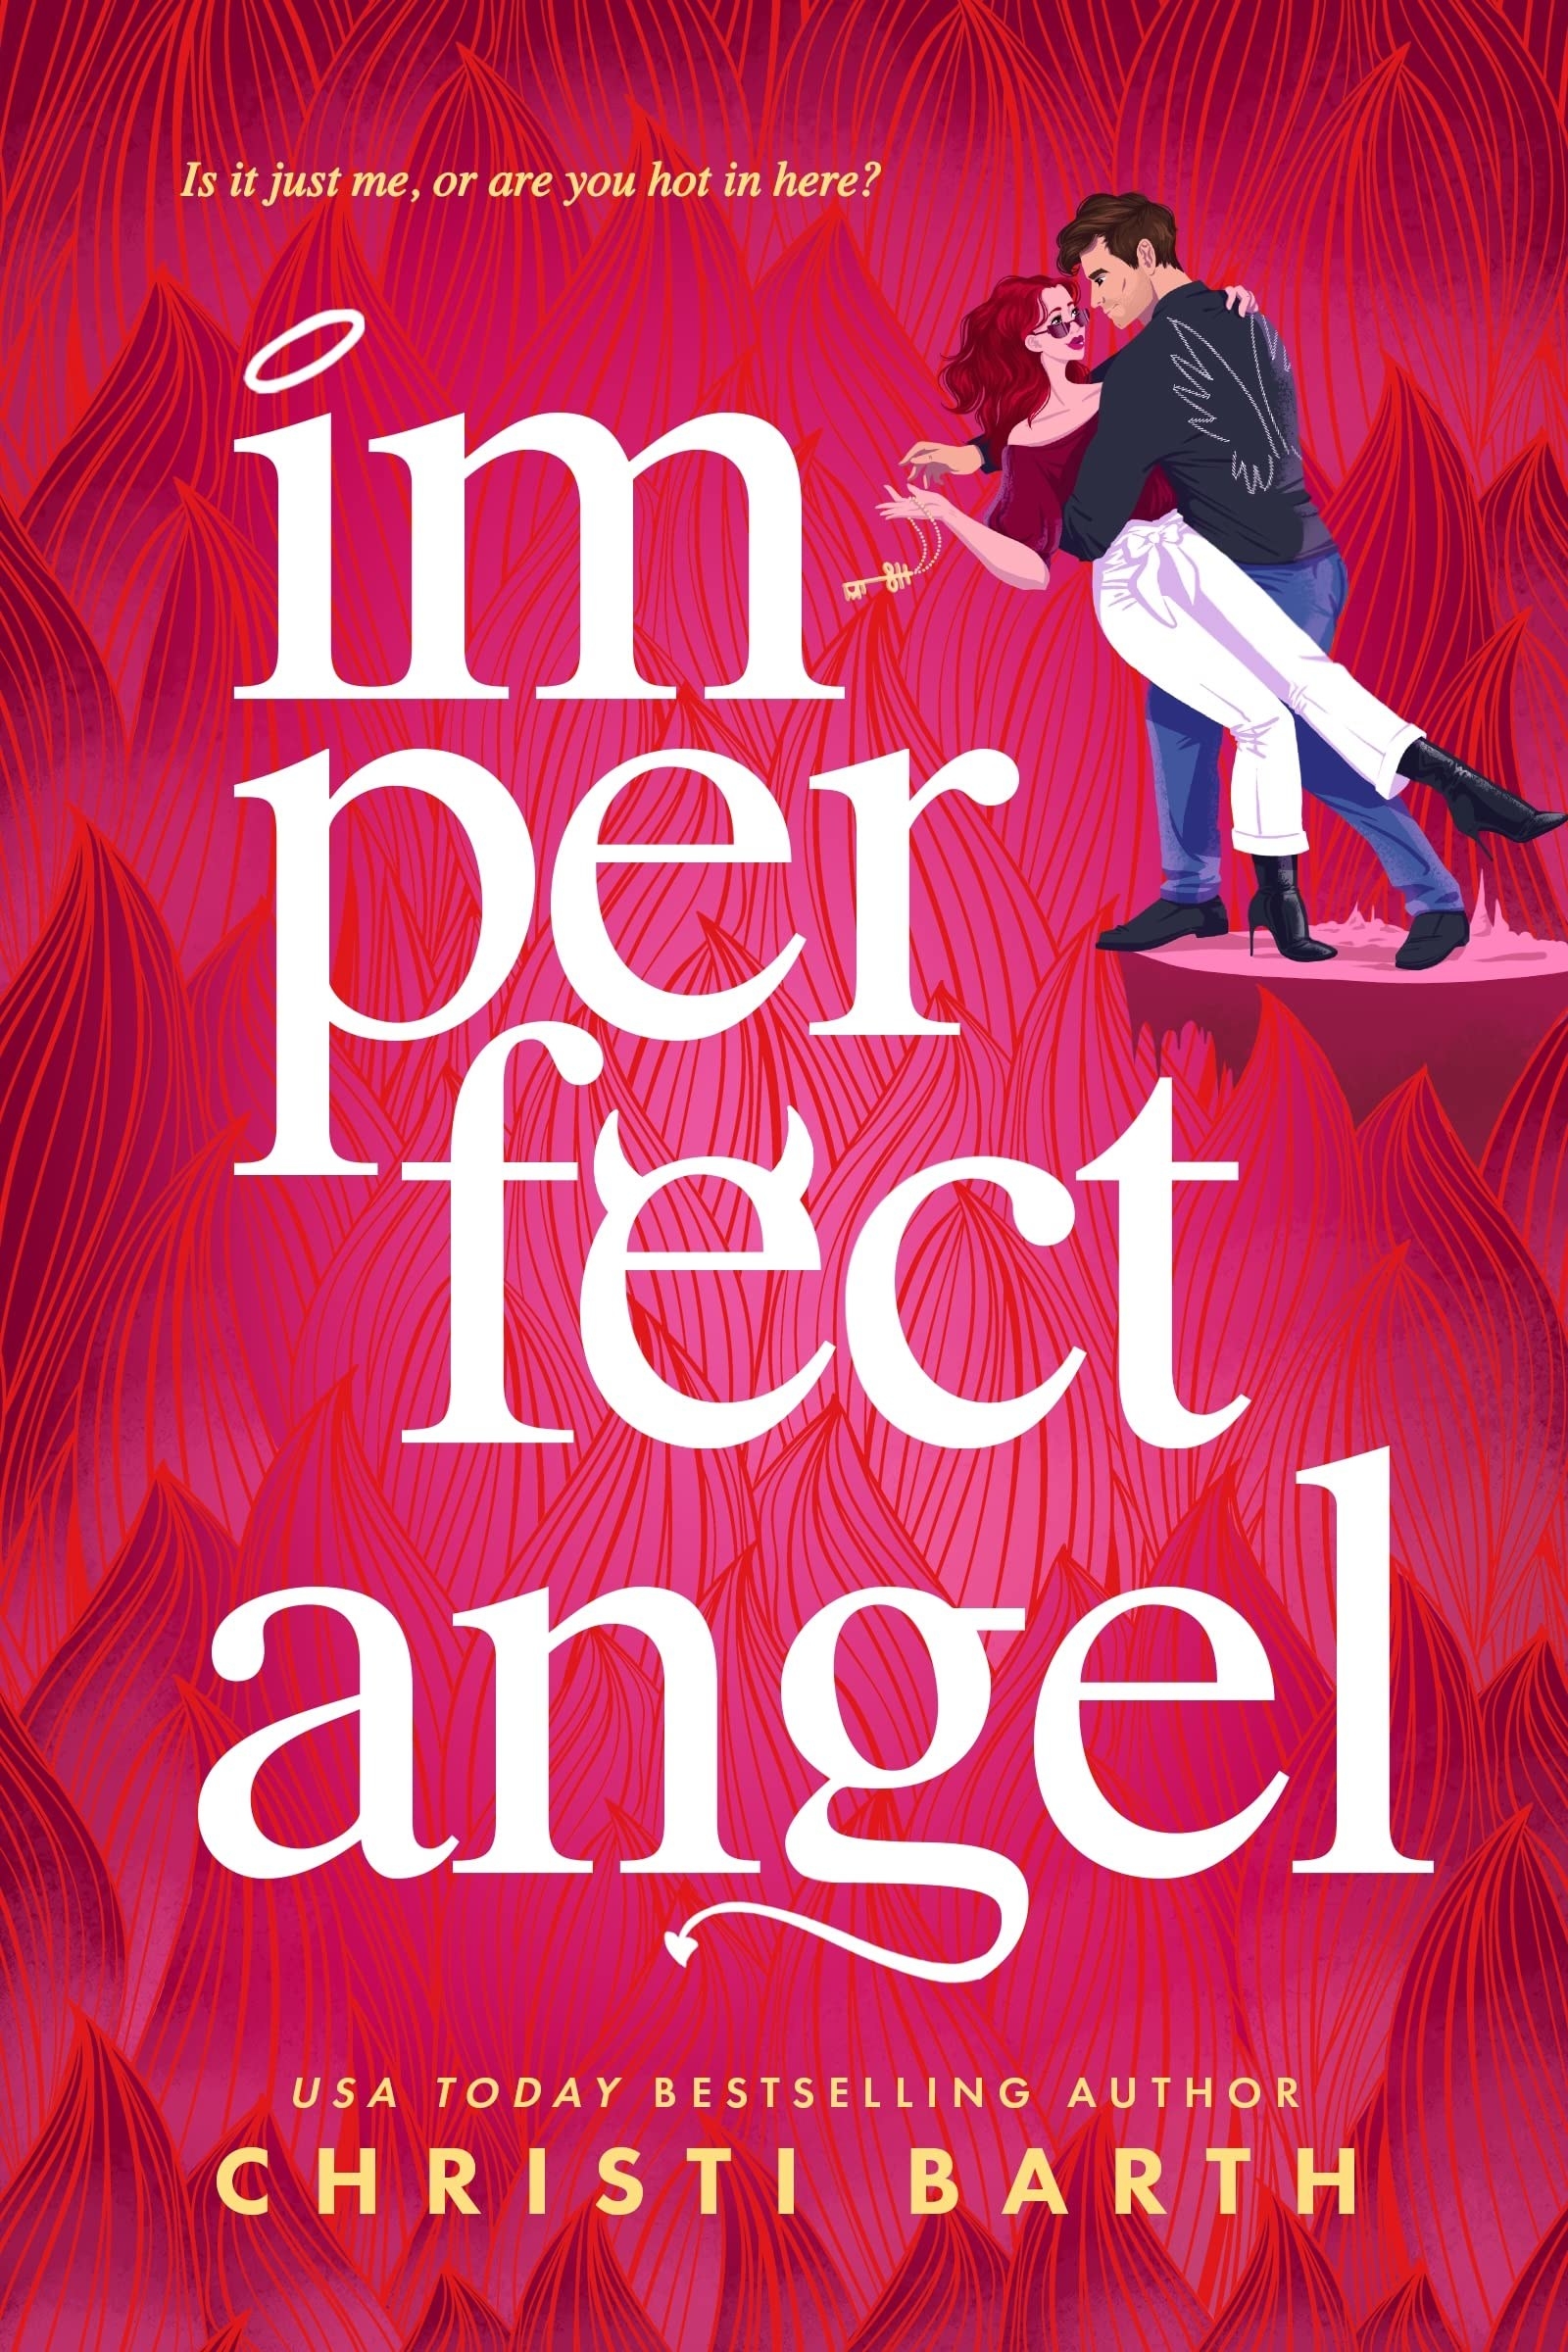 Imperfect Angel book cover. Book by Christi Barth.